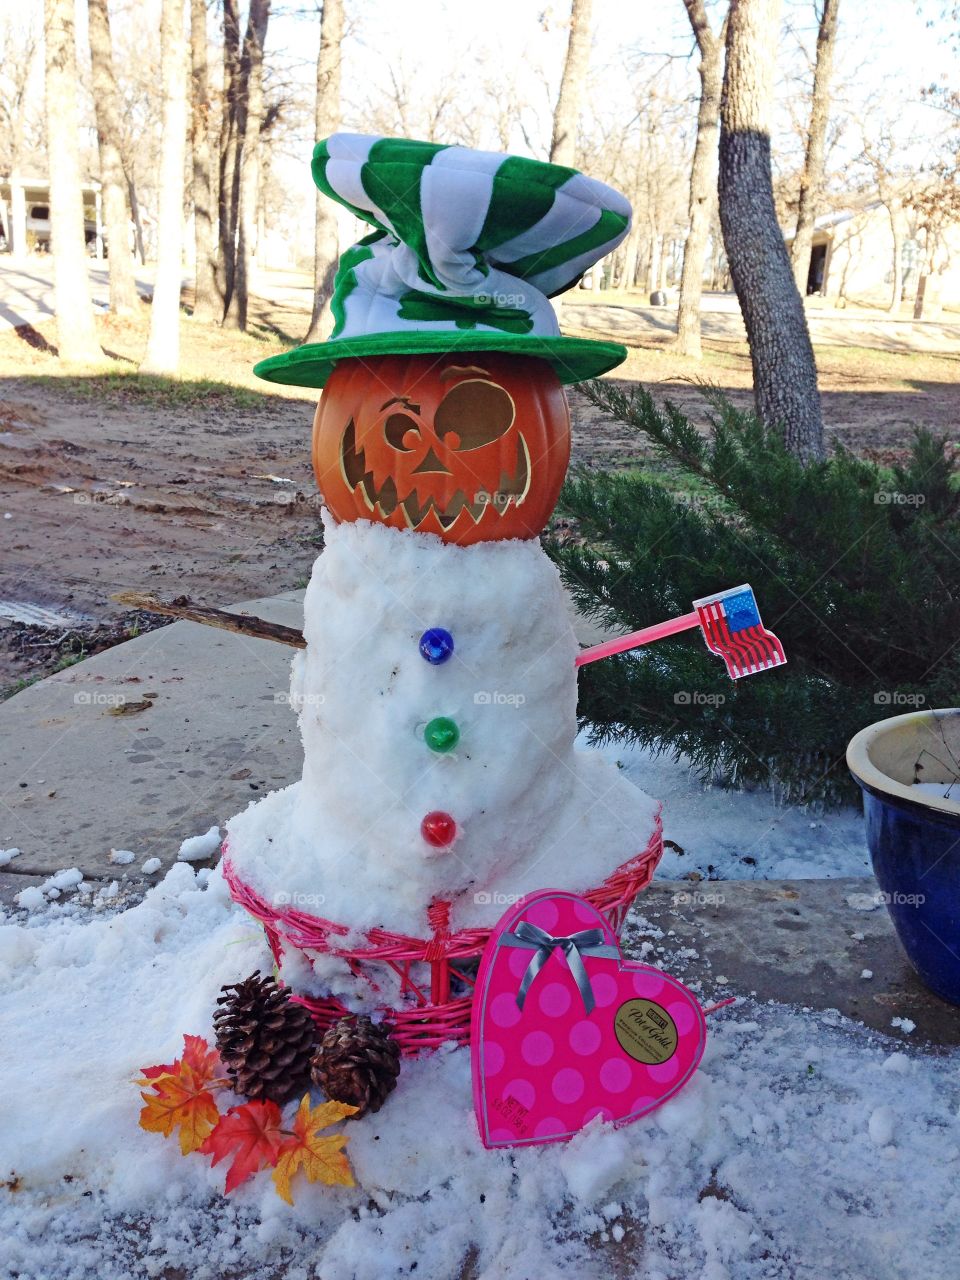 Holiday Snowman. We don't get much snow in Texas, but when we do we get creative.